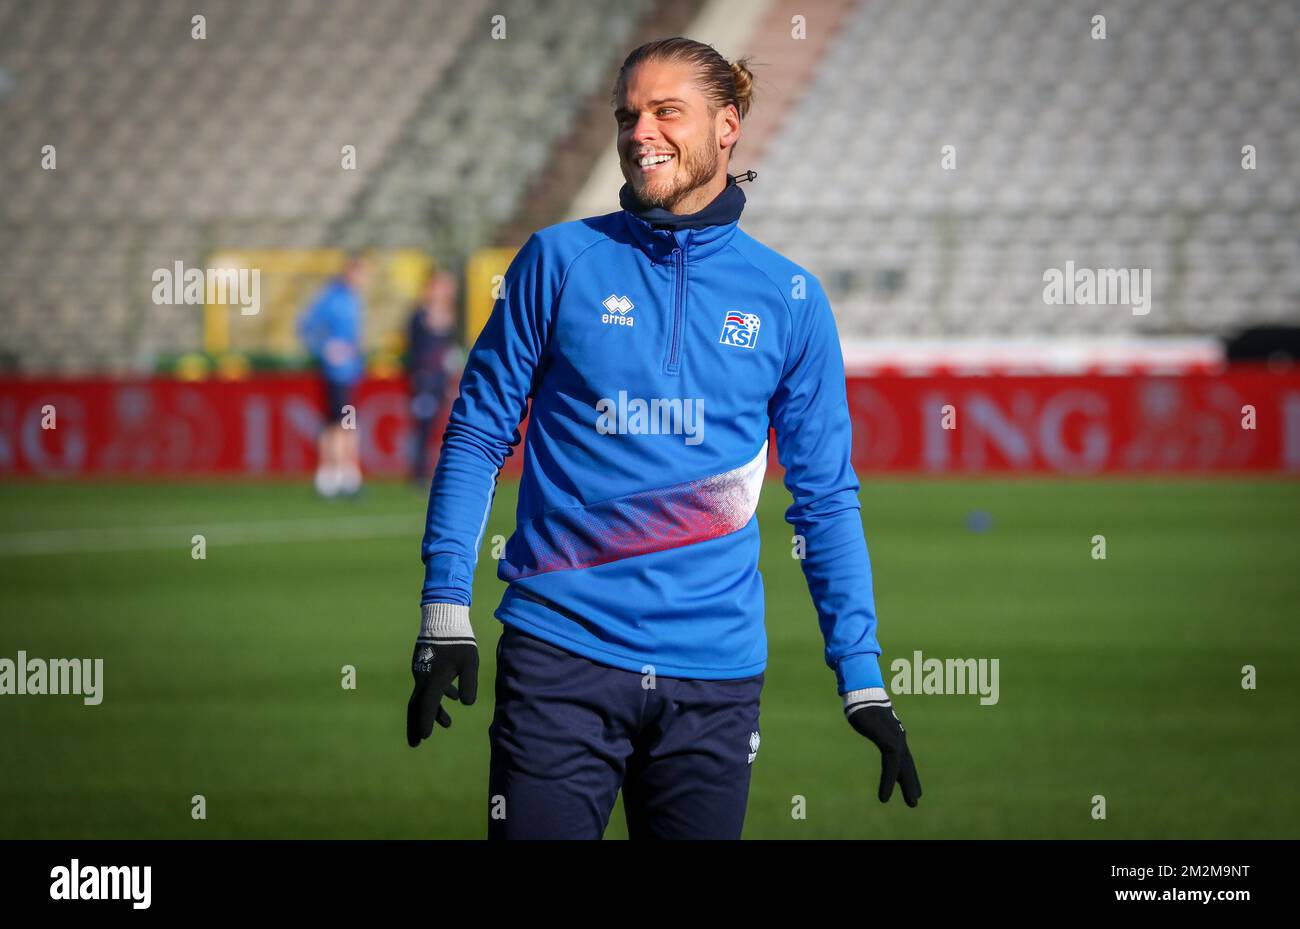 Iceland's Rurik Gislason pictured during a training session of Iceland national soccer team, in Brussels, Wednesday 14 November 2018. Iceland will play tomorrow Belgium in the Nation League competition. BELGA PHOTO VIRGINIE LEFOUR Stock Photo